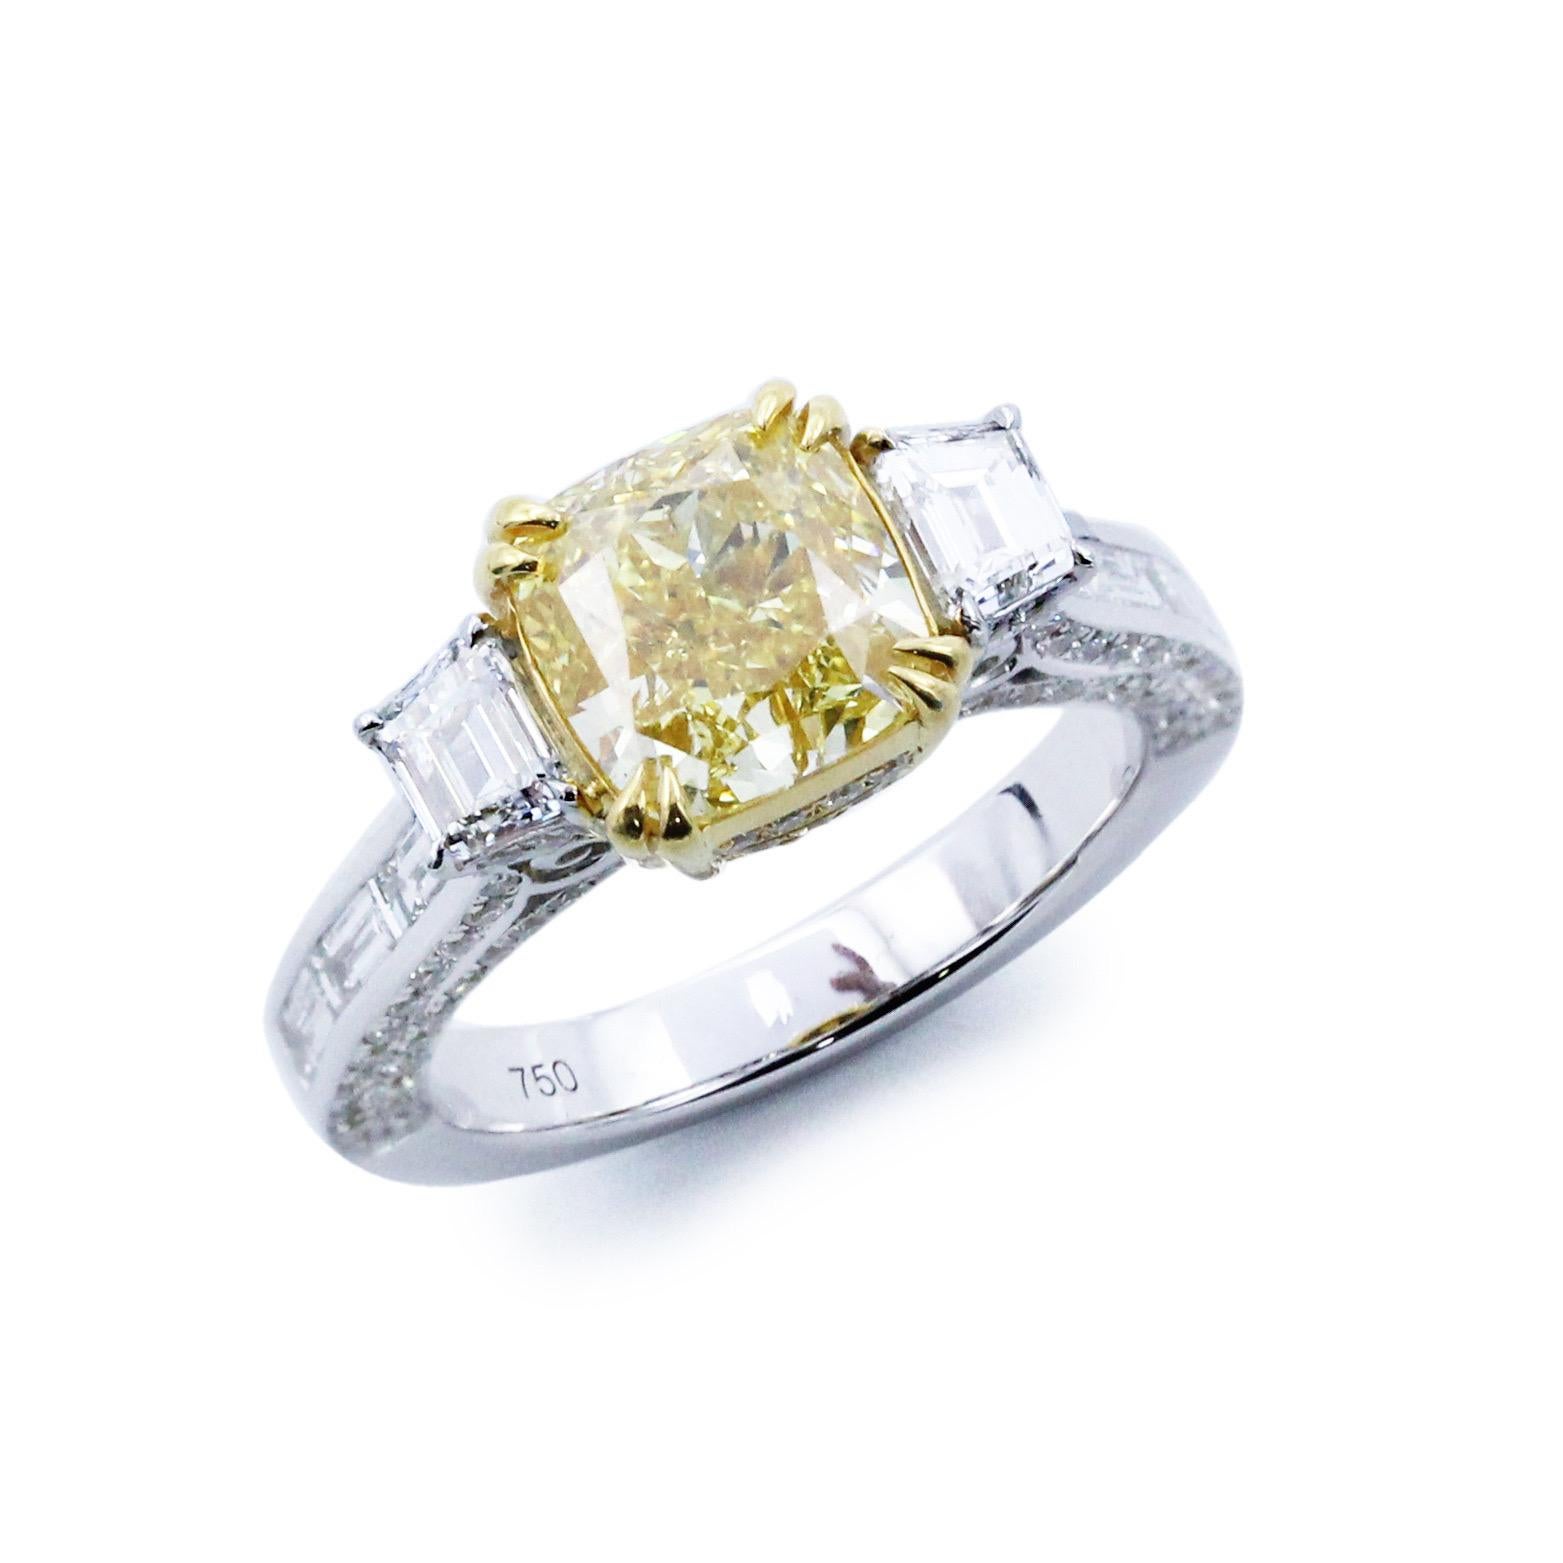 From The Vault at Emilio Jewelry Located on New York's iconic Fifth Avenue,
Showcasing a very special and rare Gia certified natural fancy intense yellow diamond of 3.00 carats set in the center. Set with an additional 1.60cts of colorless vs